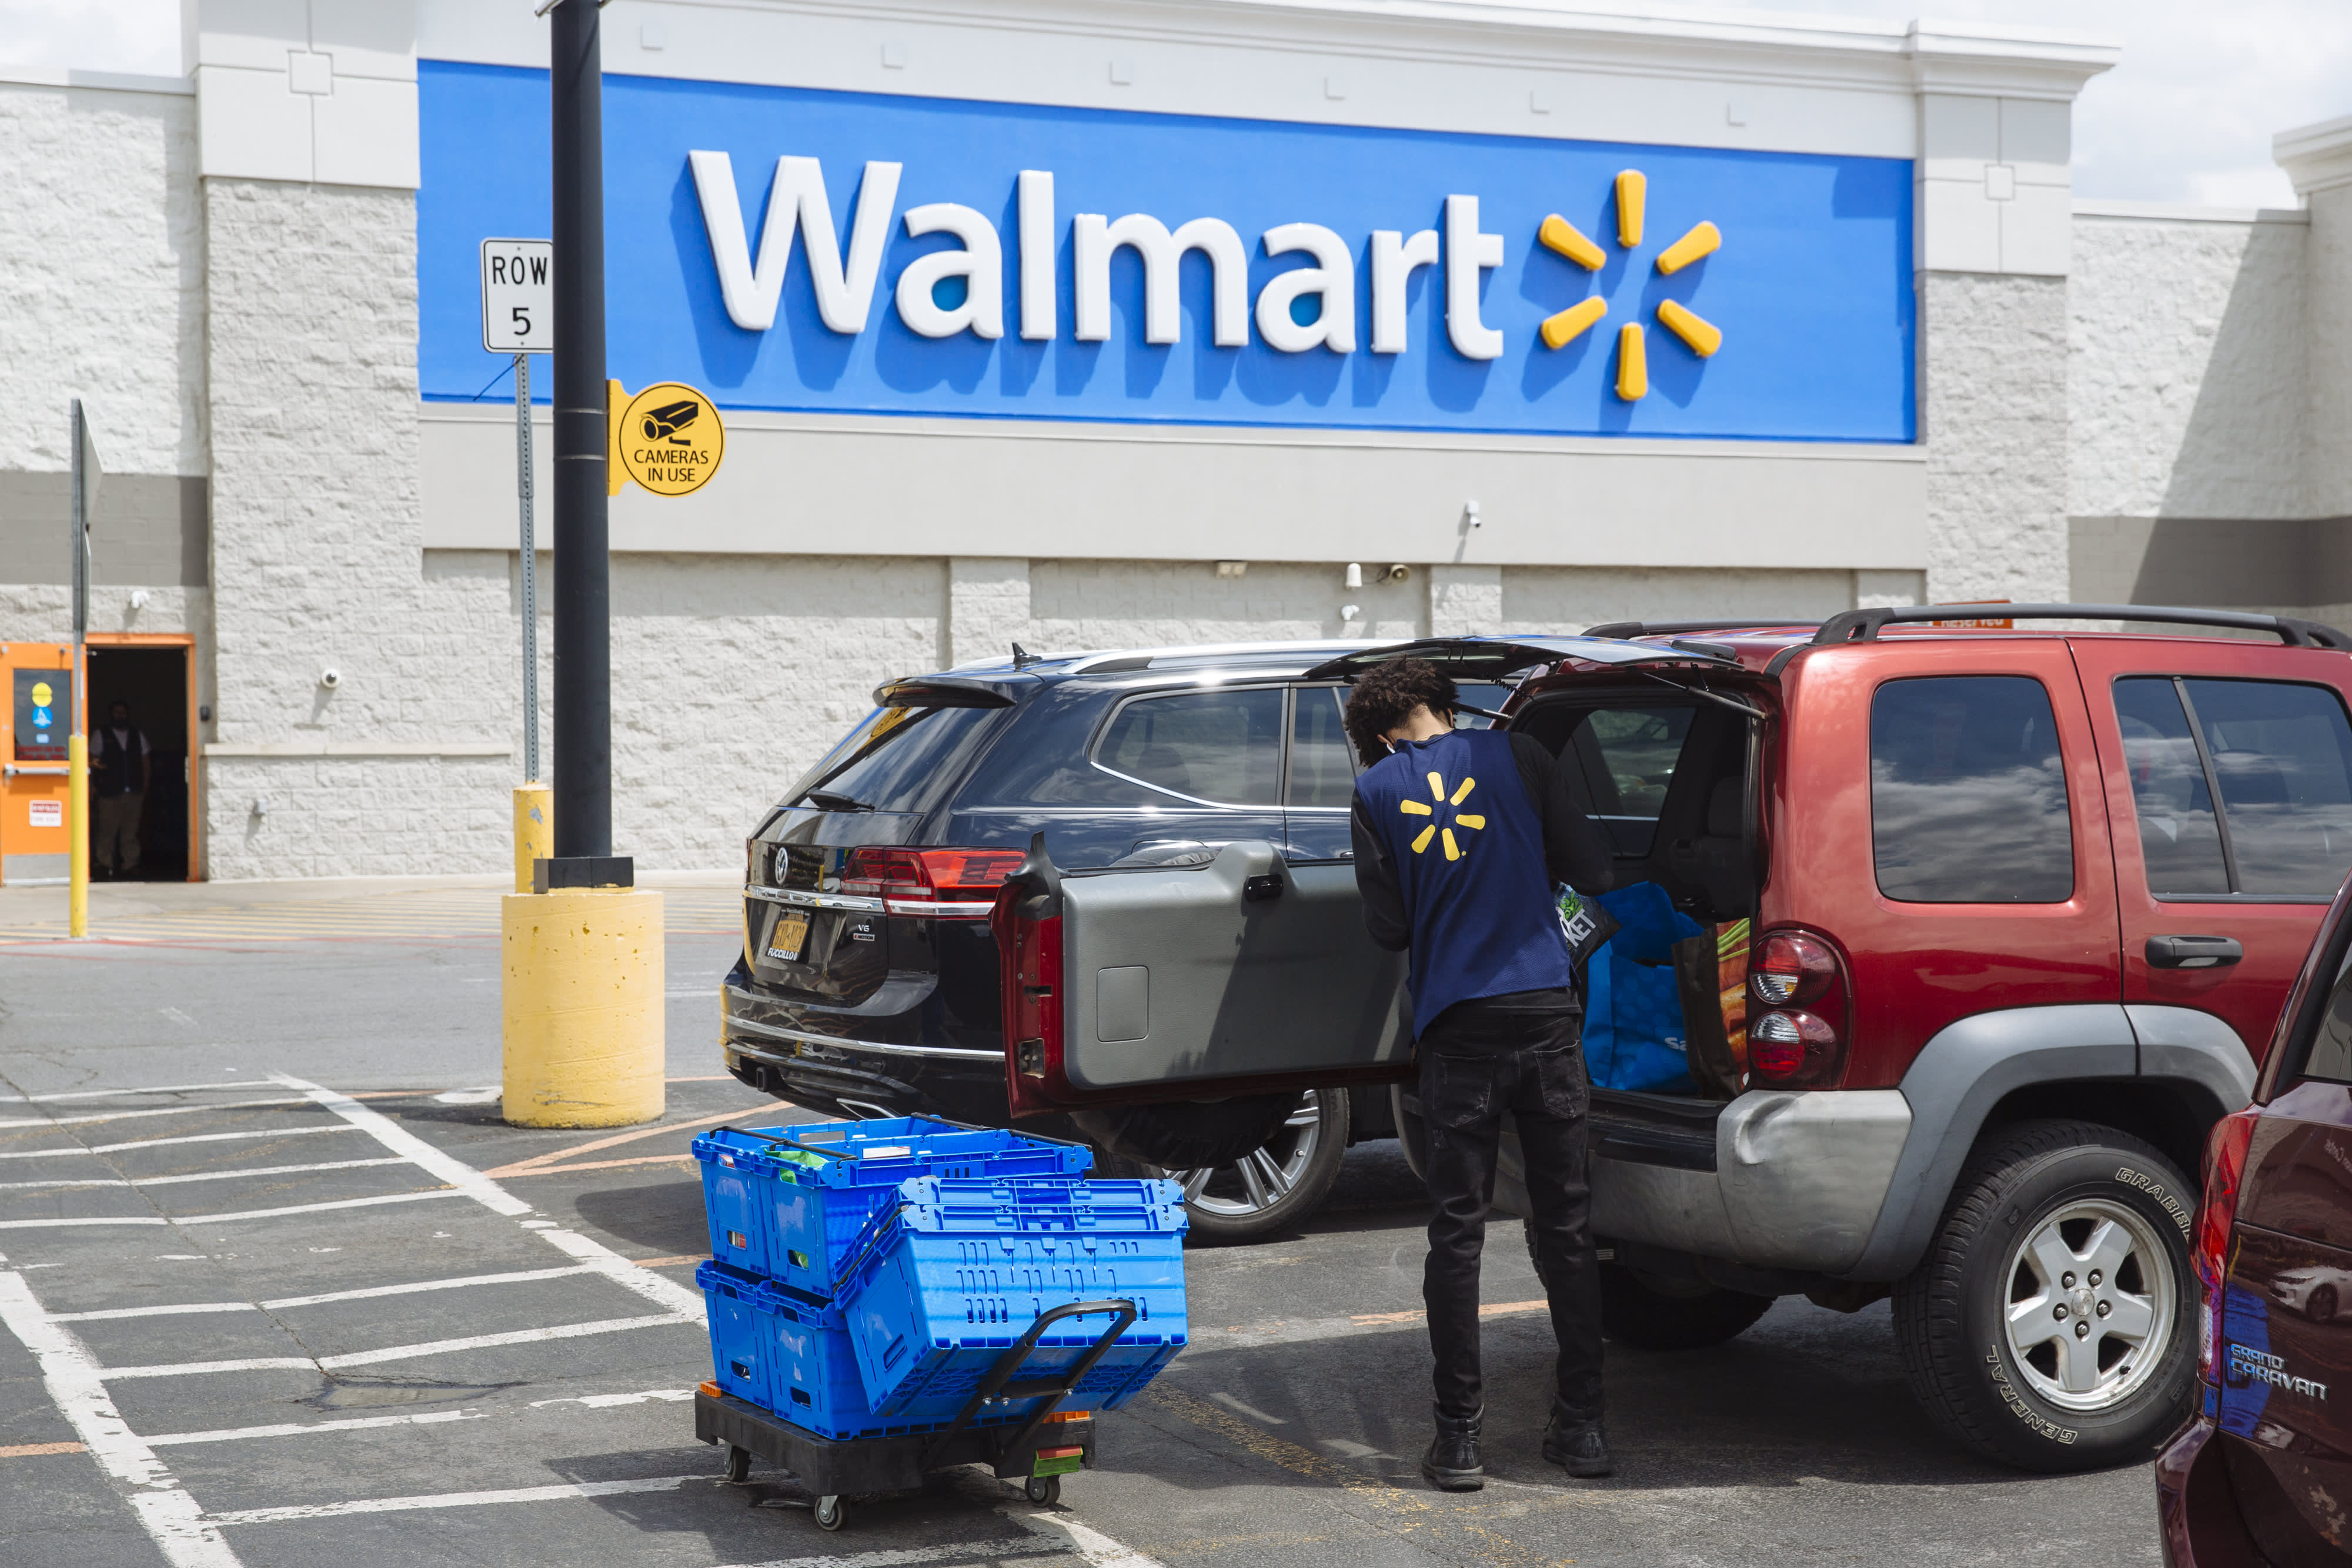 Walmart to support US manufacturers with $ 350 billion in additional business